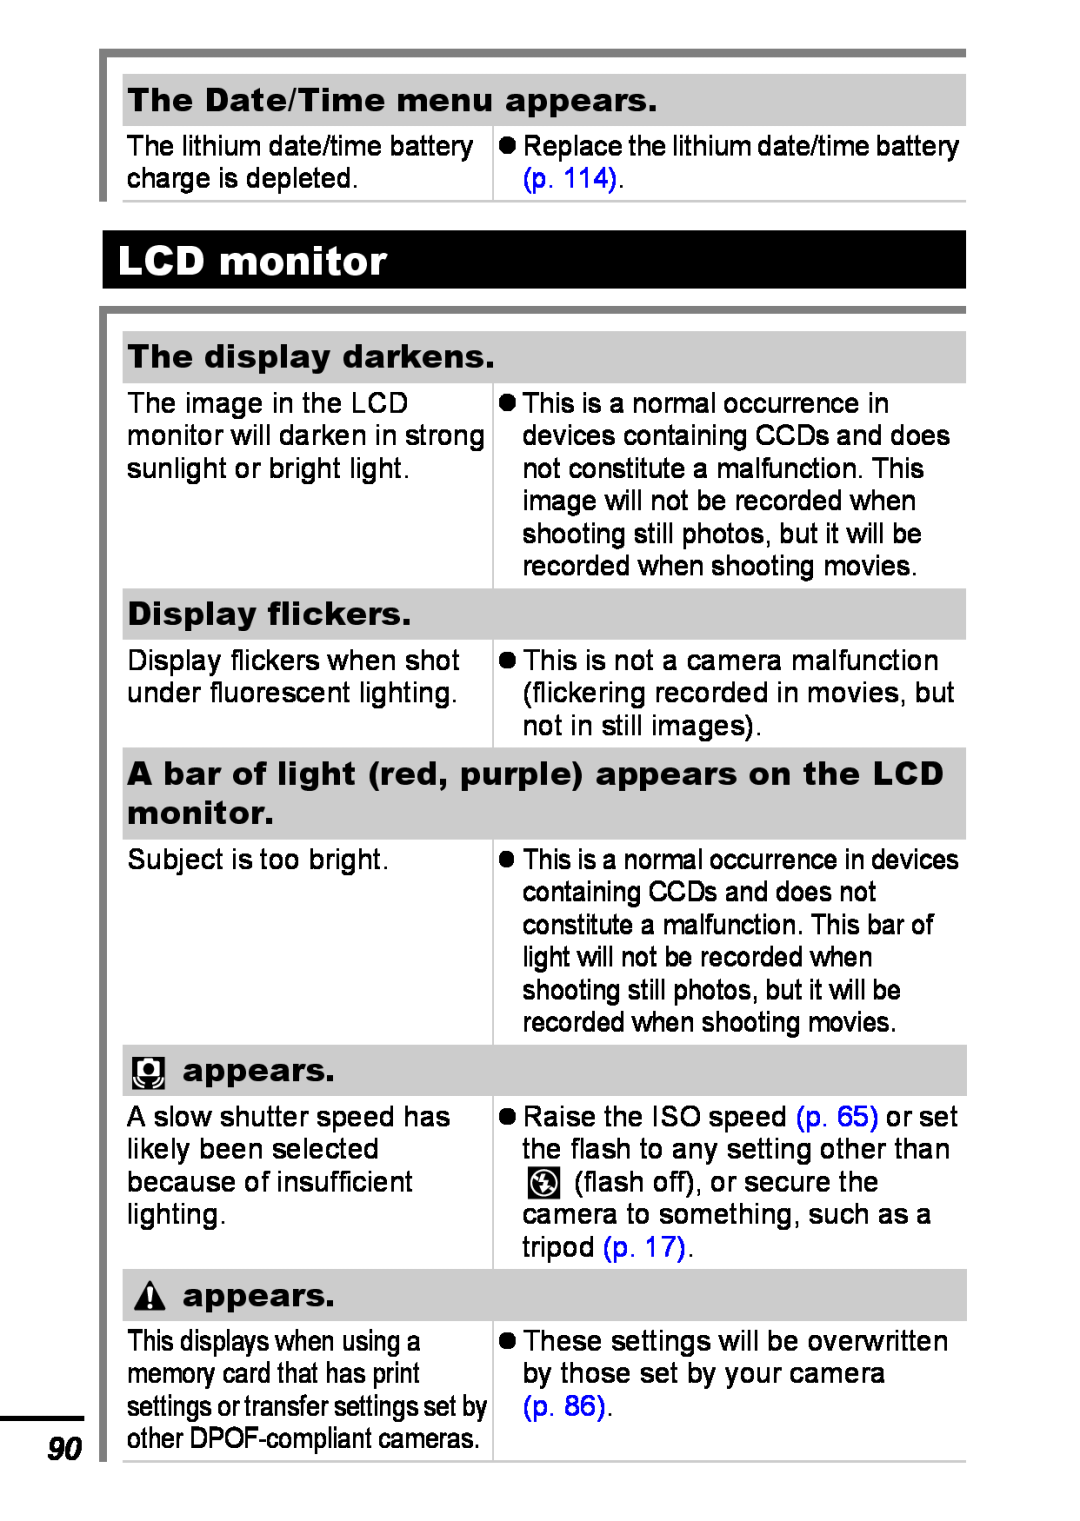 Canon A540 appendix LCD monitor, The Date/Time menu appears, The display darkens, Display flickers 